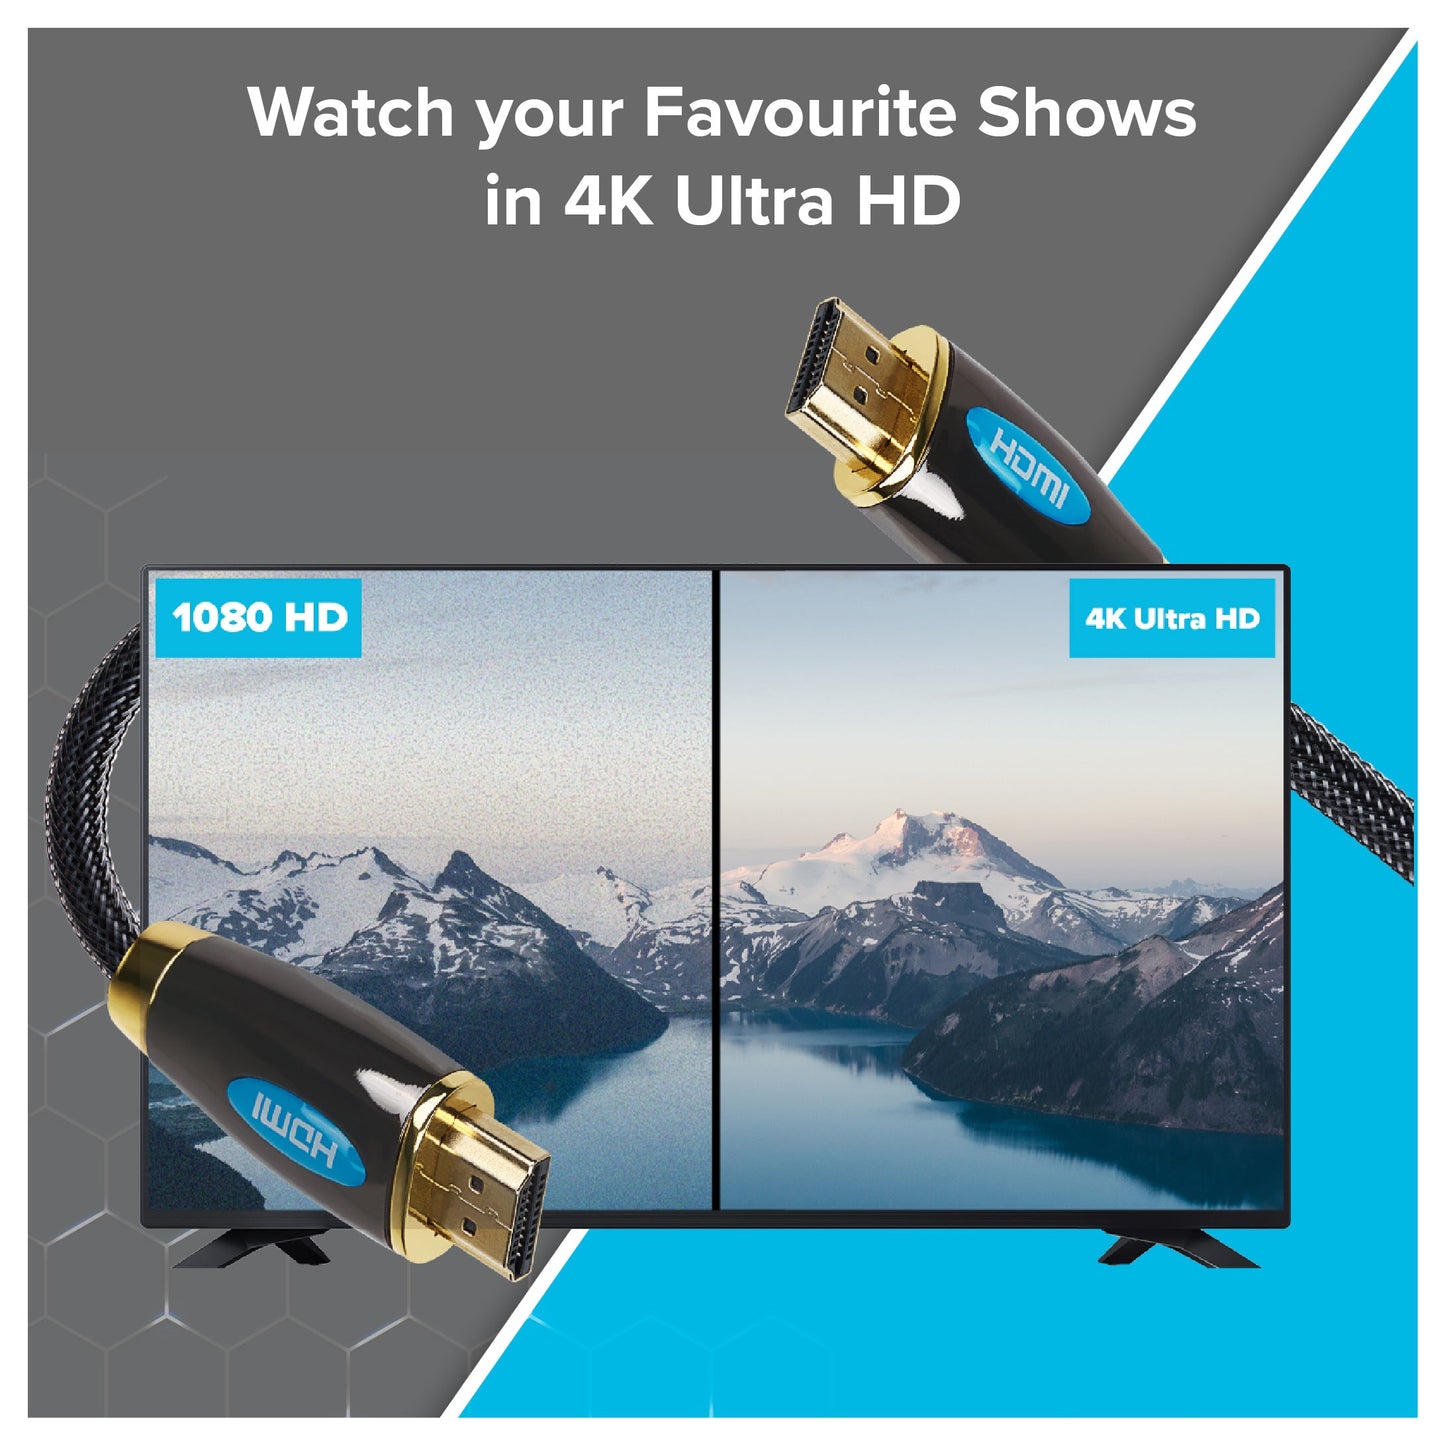 Maplin Pro HDMI to HDMI 4K Ultra HD Braided Cable with Gold Connectors - Black, 3m - maplin.co.uk